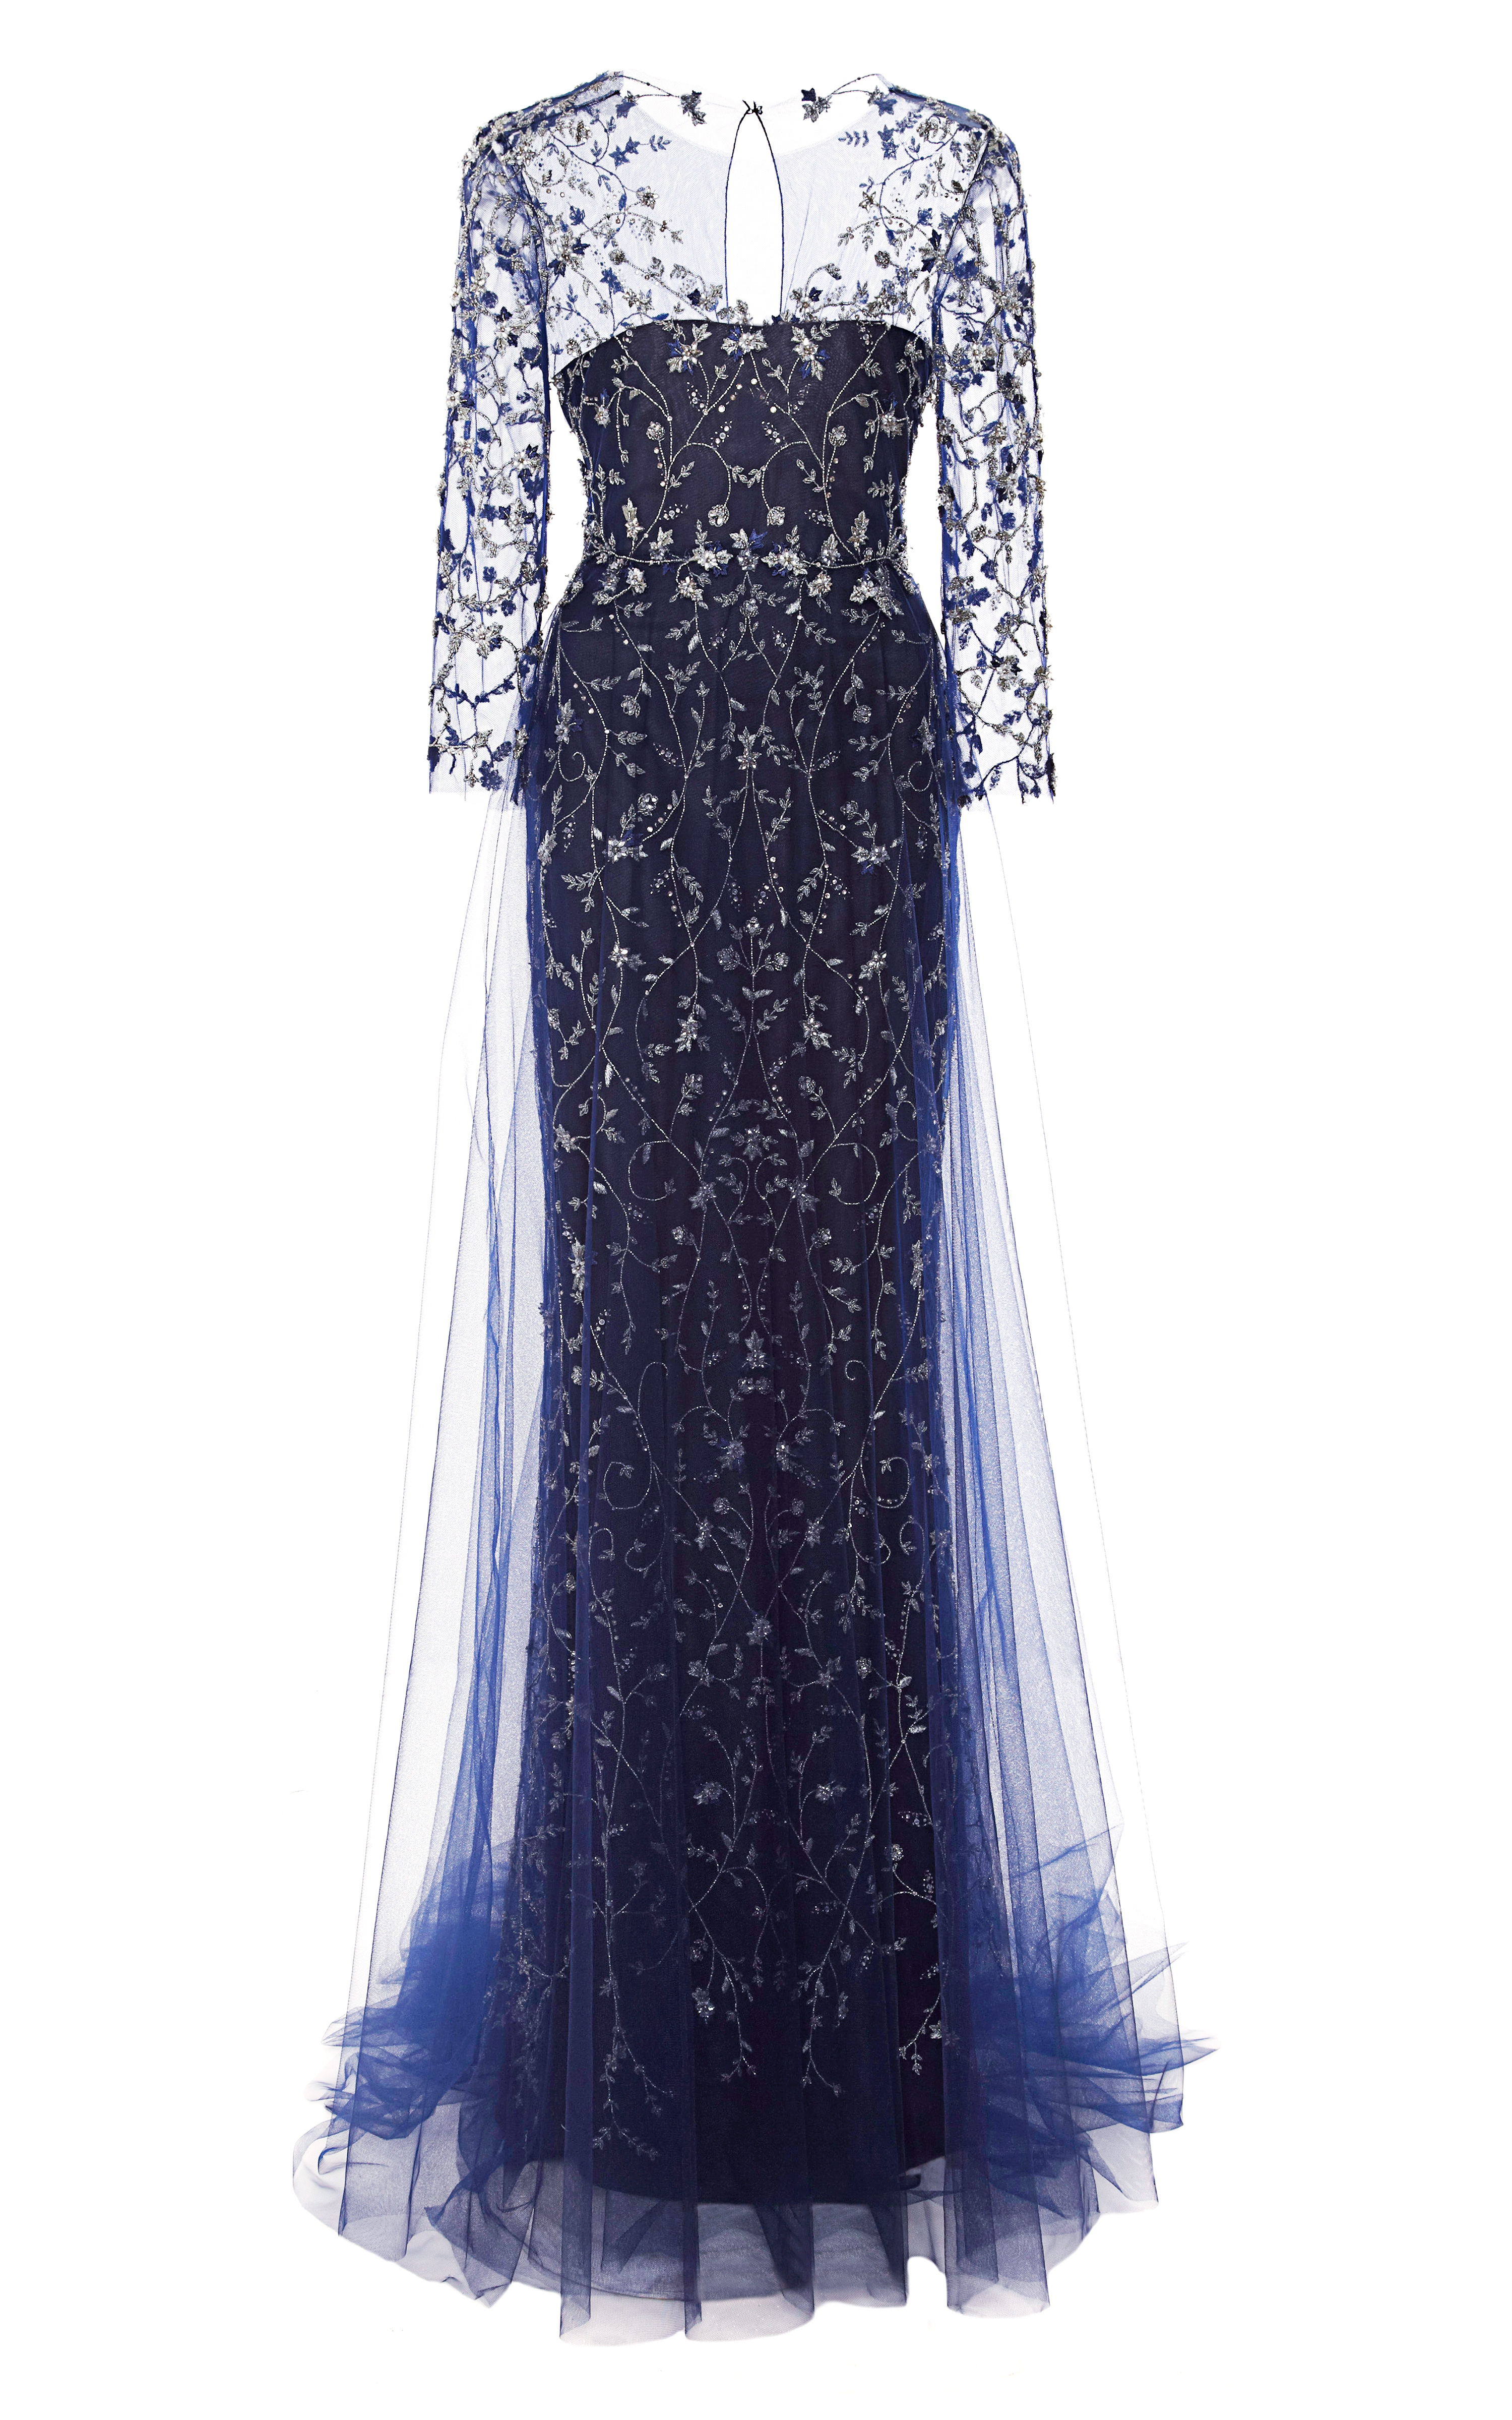 Lyst - Marchesa Embroidered Gown with Tulle Skirt Overlay in Blue